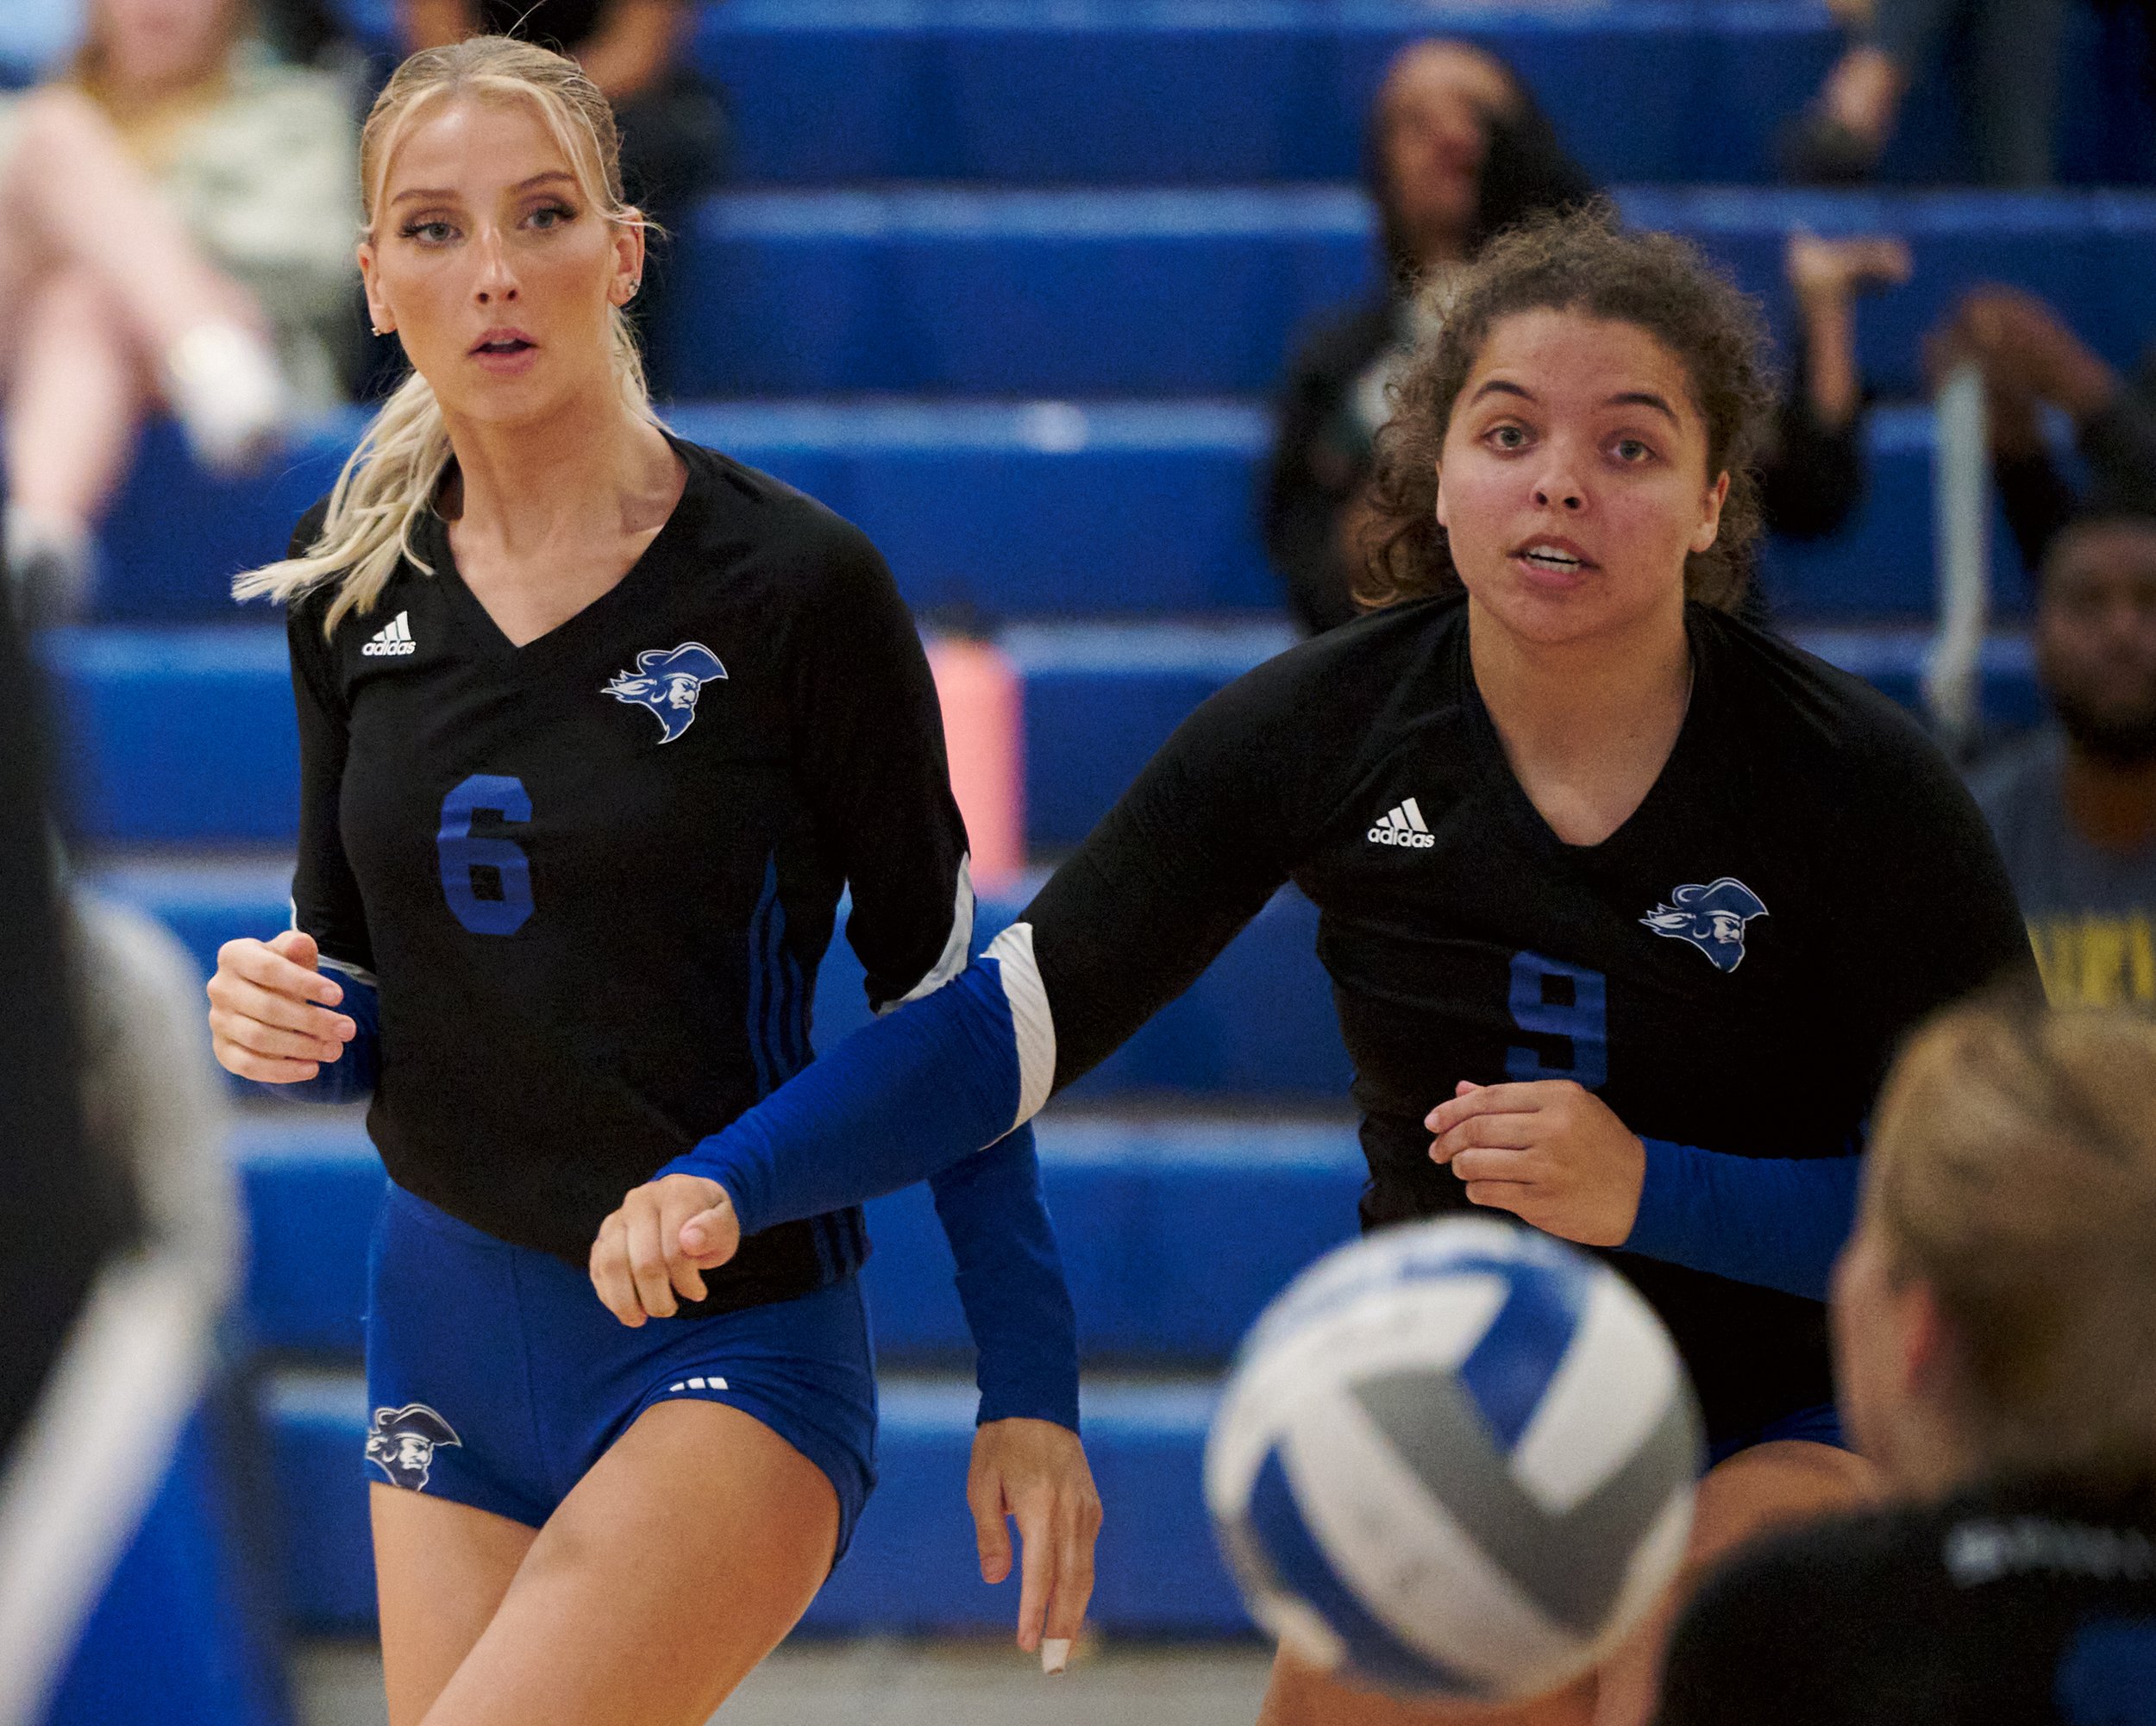  Santa Monica College Corsairs' Sophia Lawrance and Savannah Haislip during the women's volleyball game against the West Los Angeles College Wildcats on Wednesday, Oct. 26, 2022, at SMC Gym in Santa Monica, Calif. The Corsairs won 3-0. (Nicholas McCa